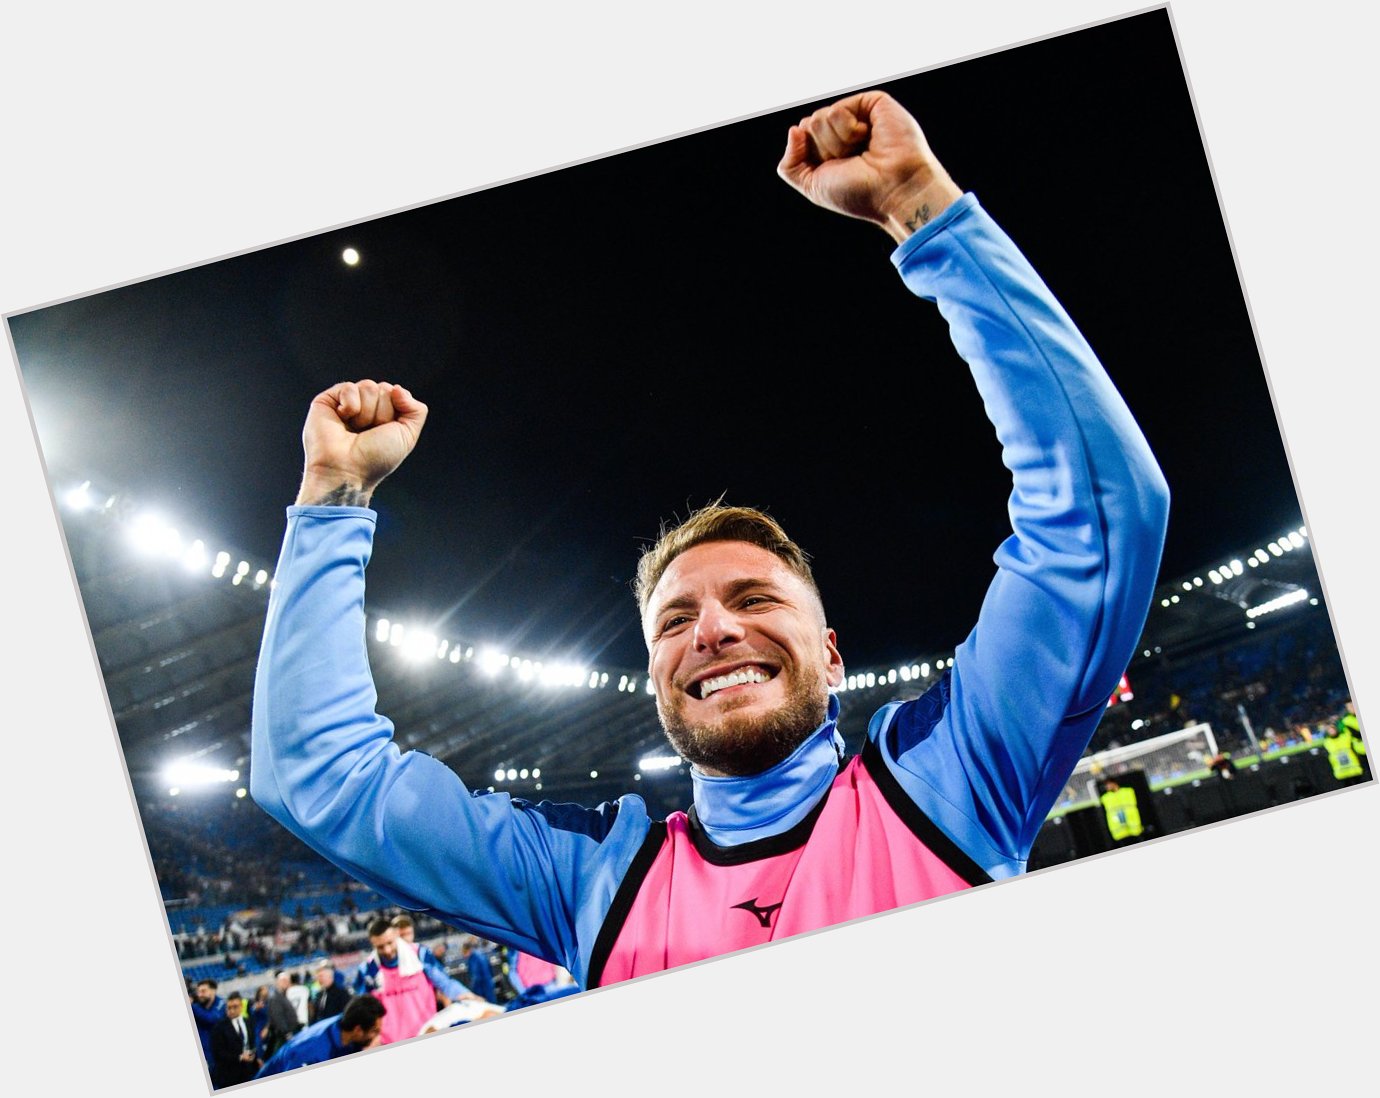 Happy birthday to Ciro Immobile, who is celebrating his 33rd birthday today.   